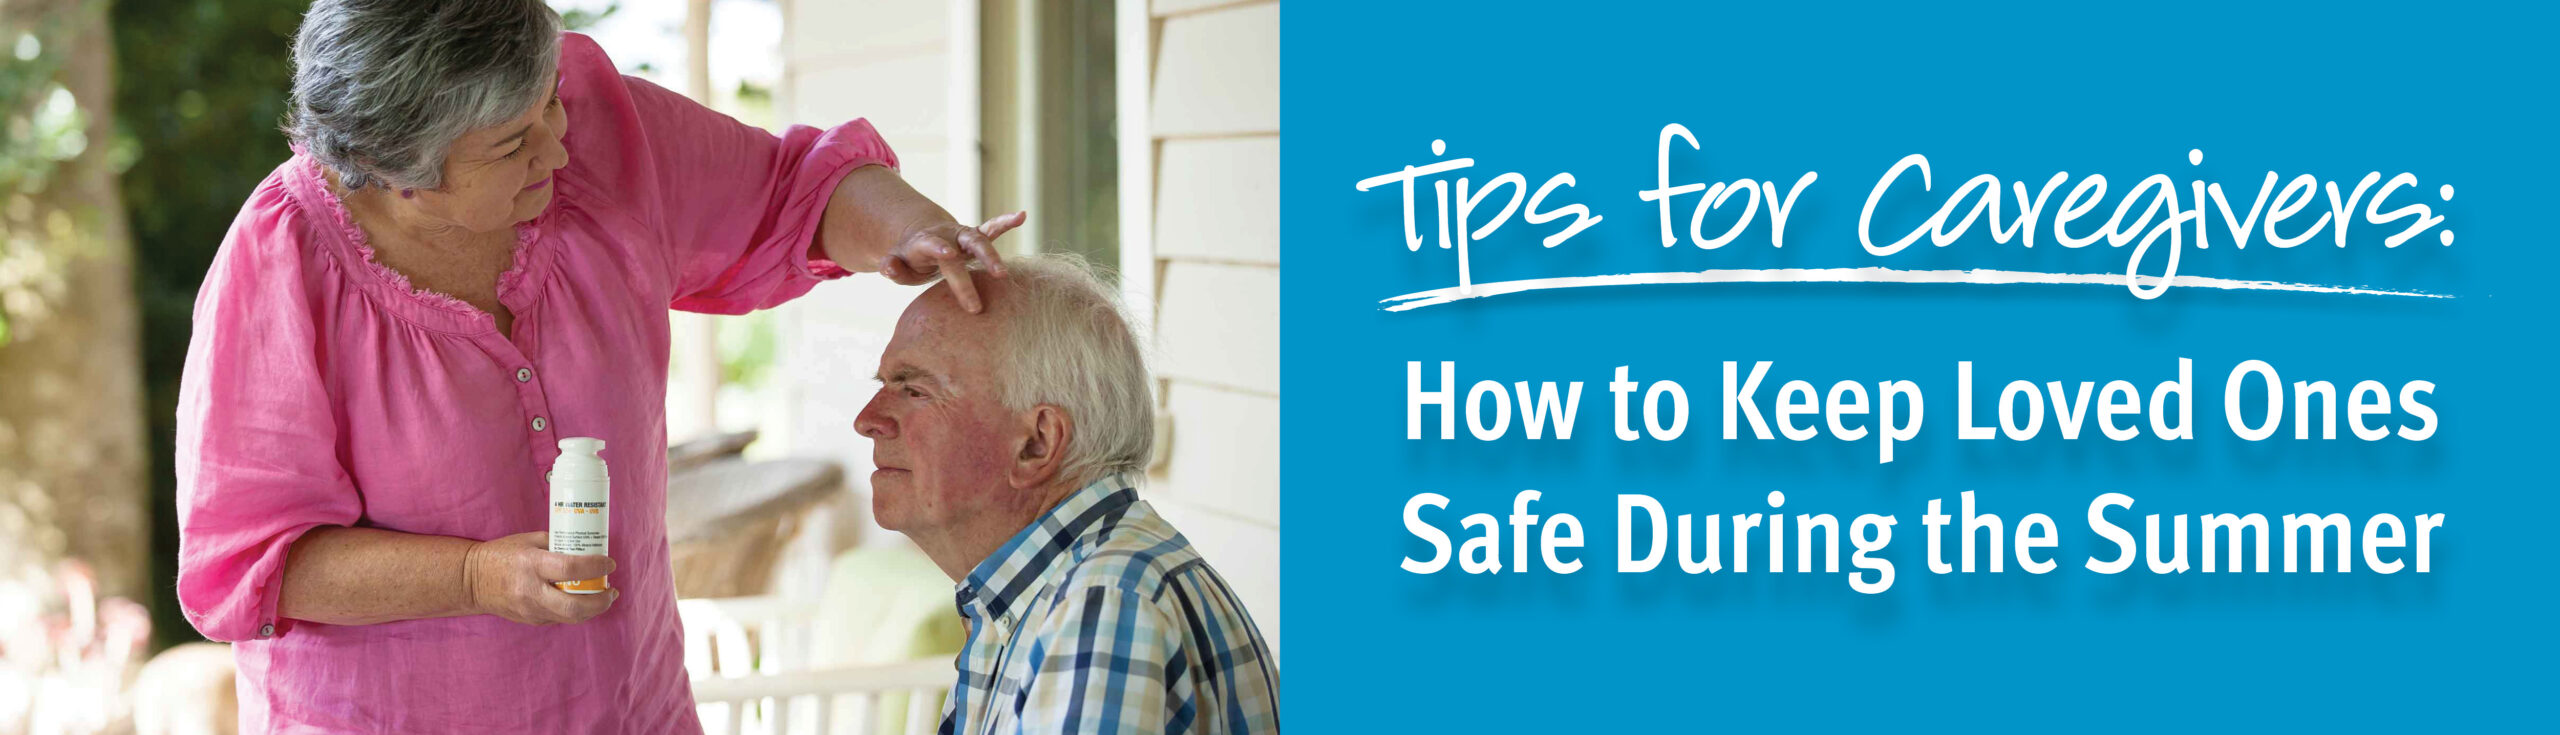 Tips for Caregivers: How to Keep Loved Ones Safe During the Summer